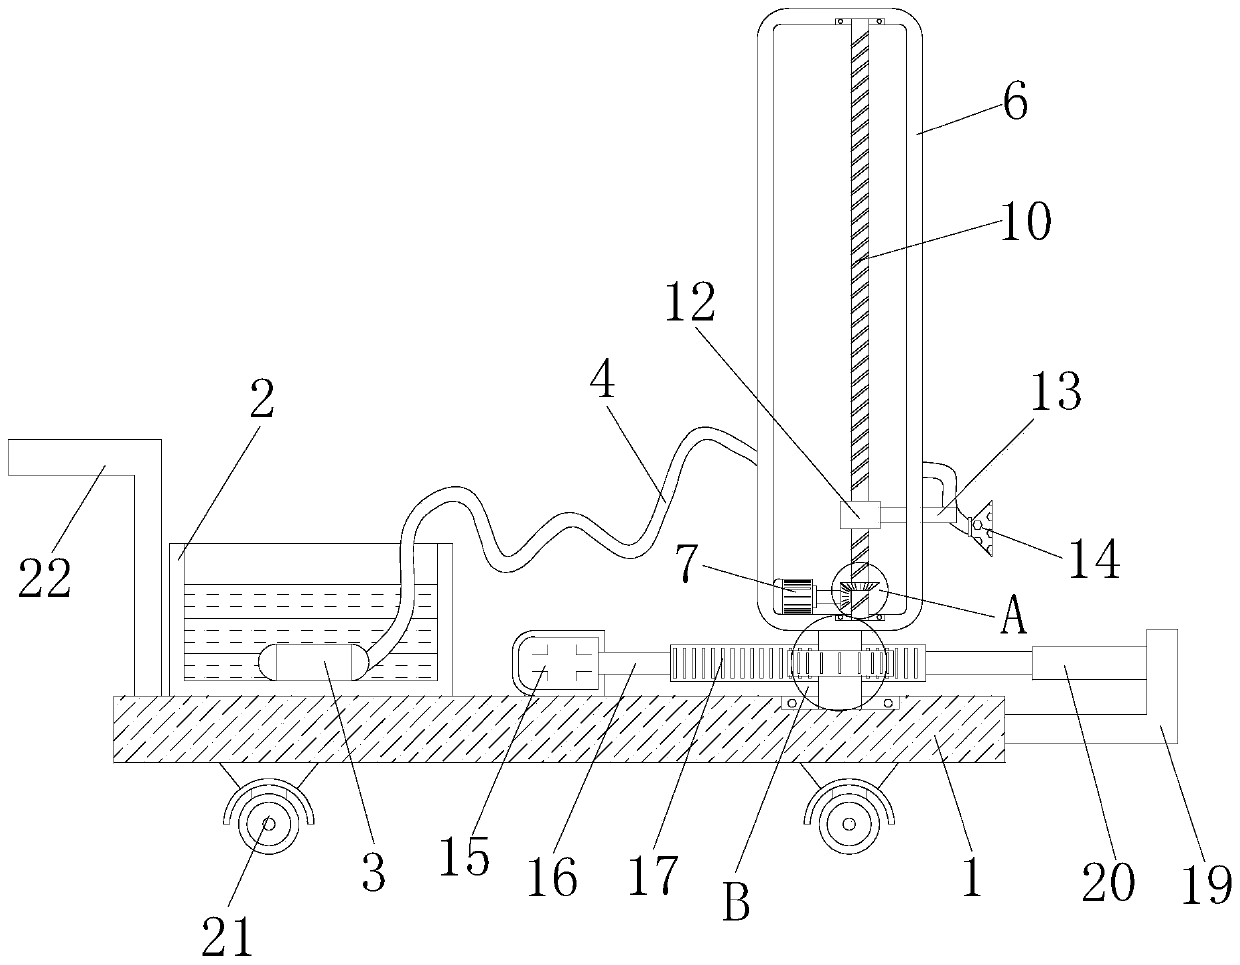 Irrigation device for planting industry